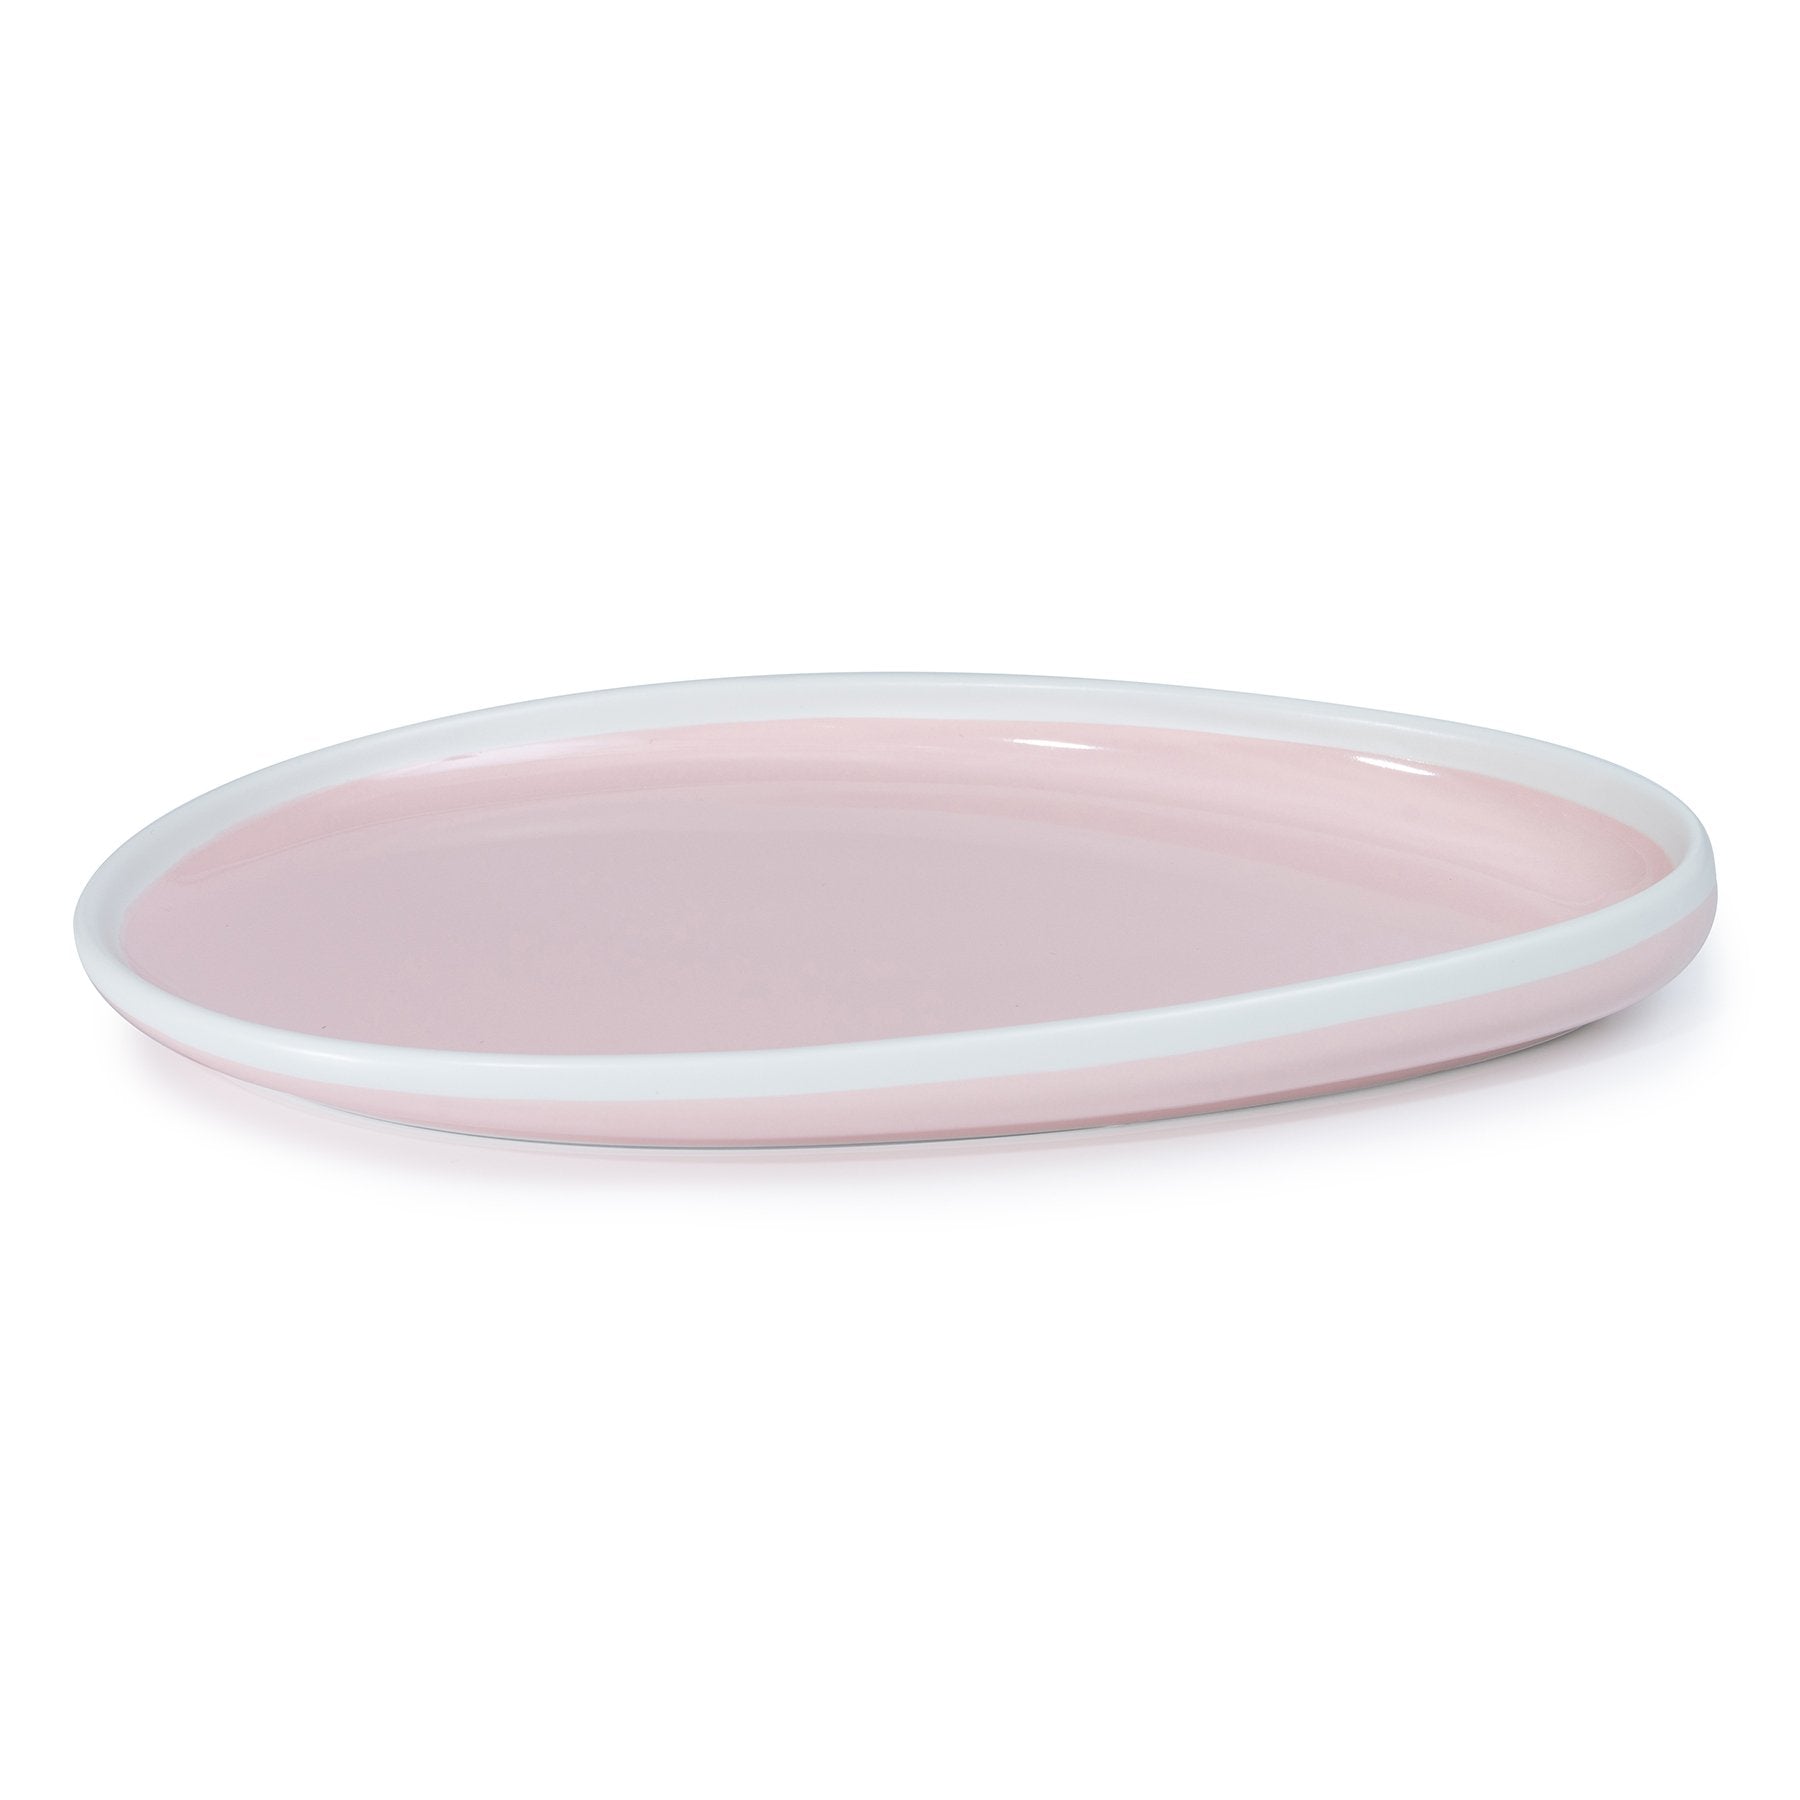 Cozy Pink by Don Bellini, Triangular Plate